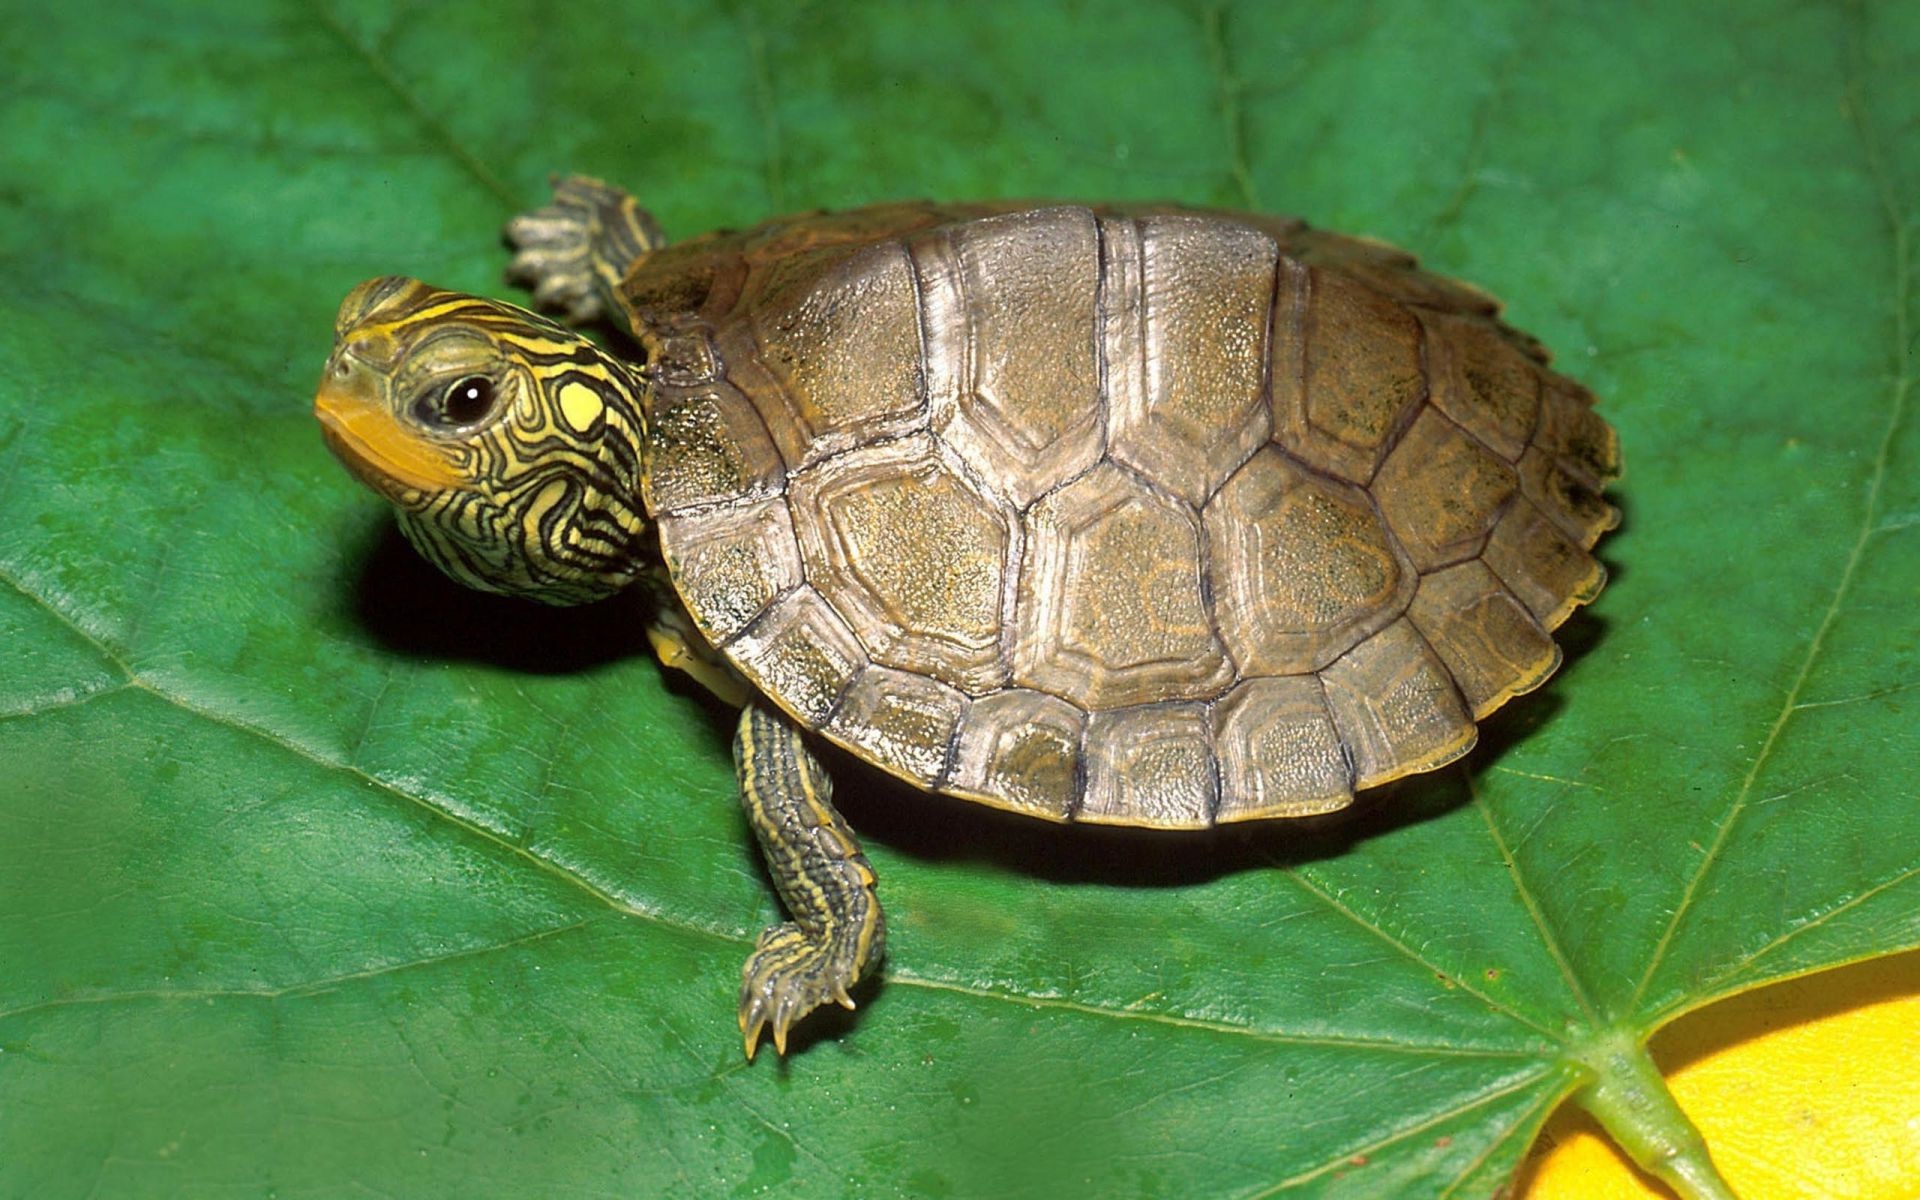 animals turtle tortoise reptile shell slow nature wildlife skidder shield armor pet animal amphibian one protection patience environment pattern